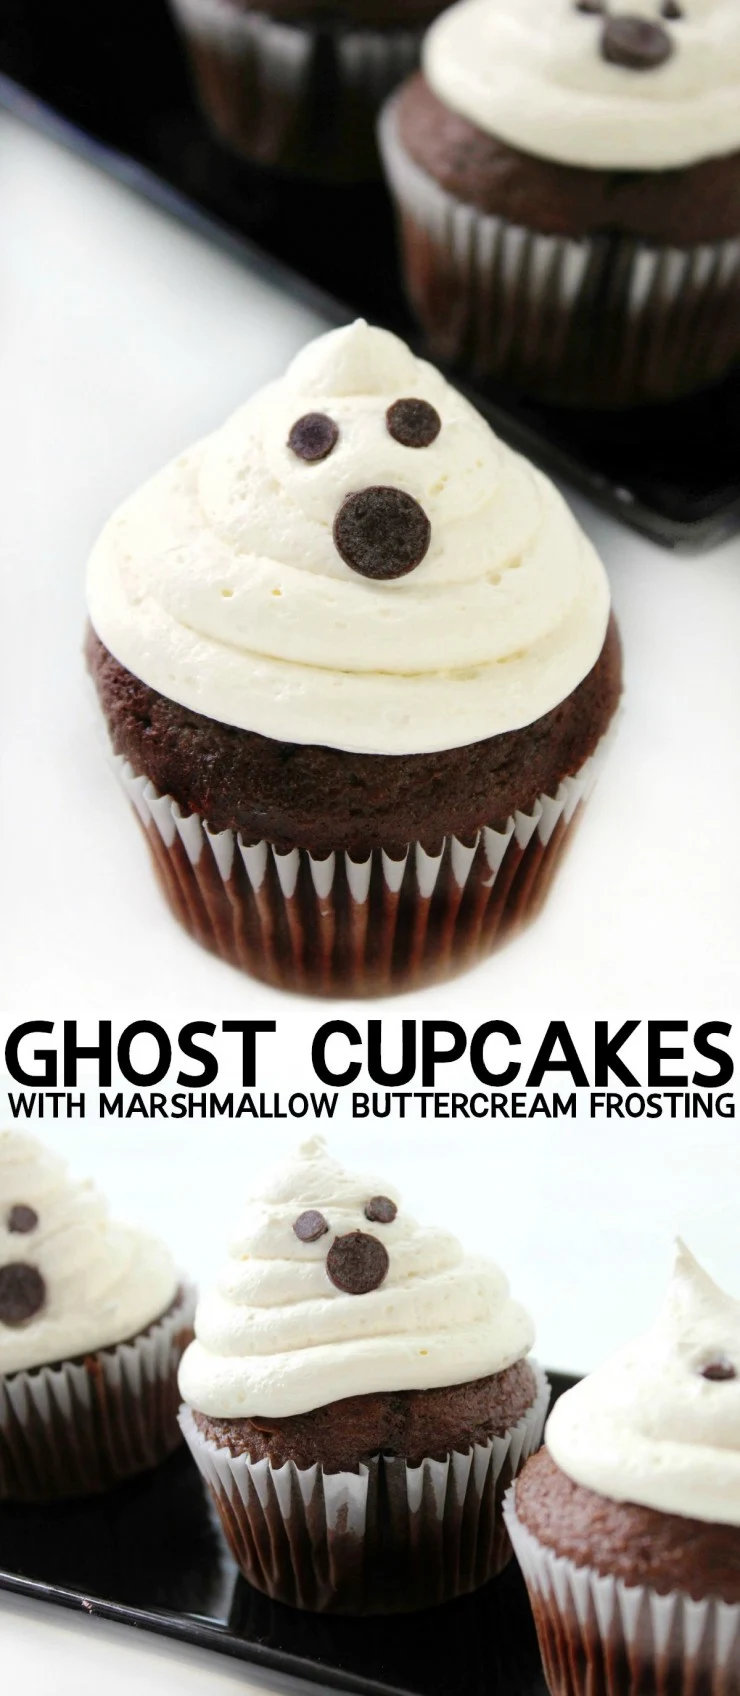 Ghost Cupcakes with Marshmallow Buttercream Frosting